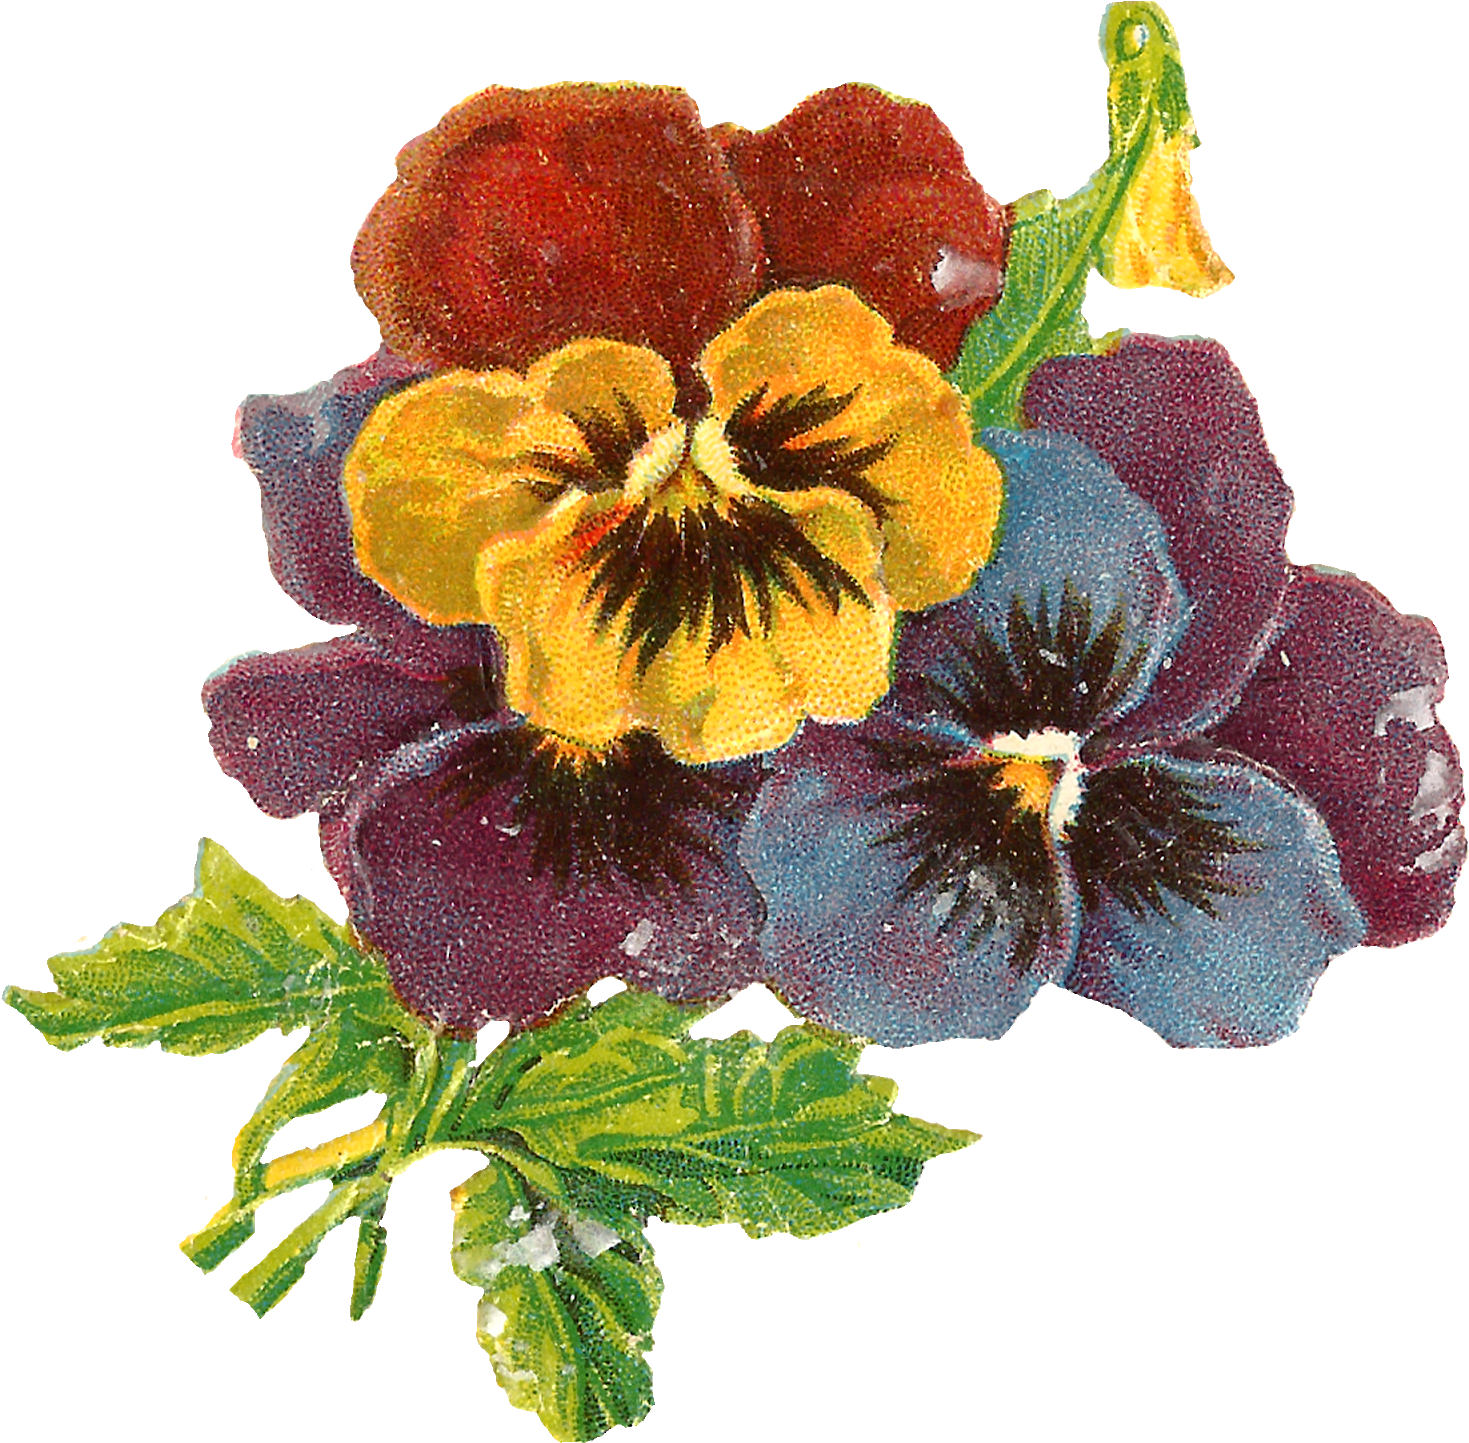 Flowers Art Floral Wildflower Pansy Botanical Illustration - Victorian Flowers (1600x1567)